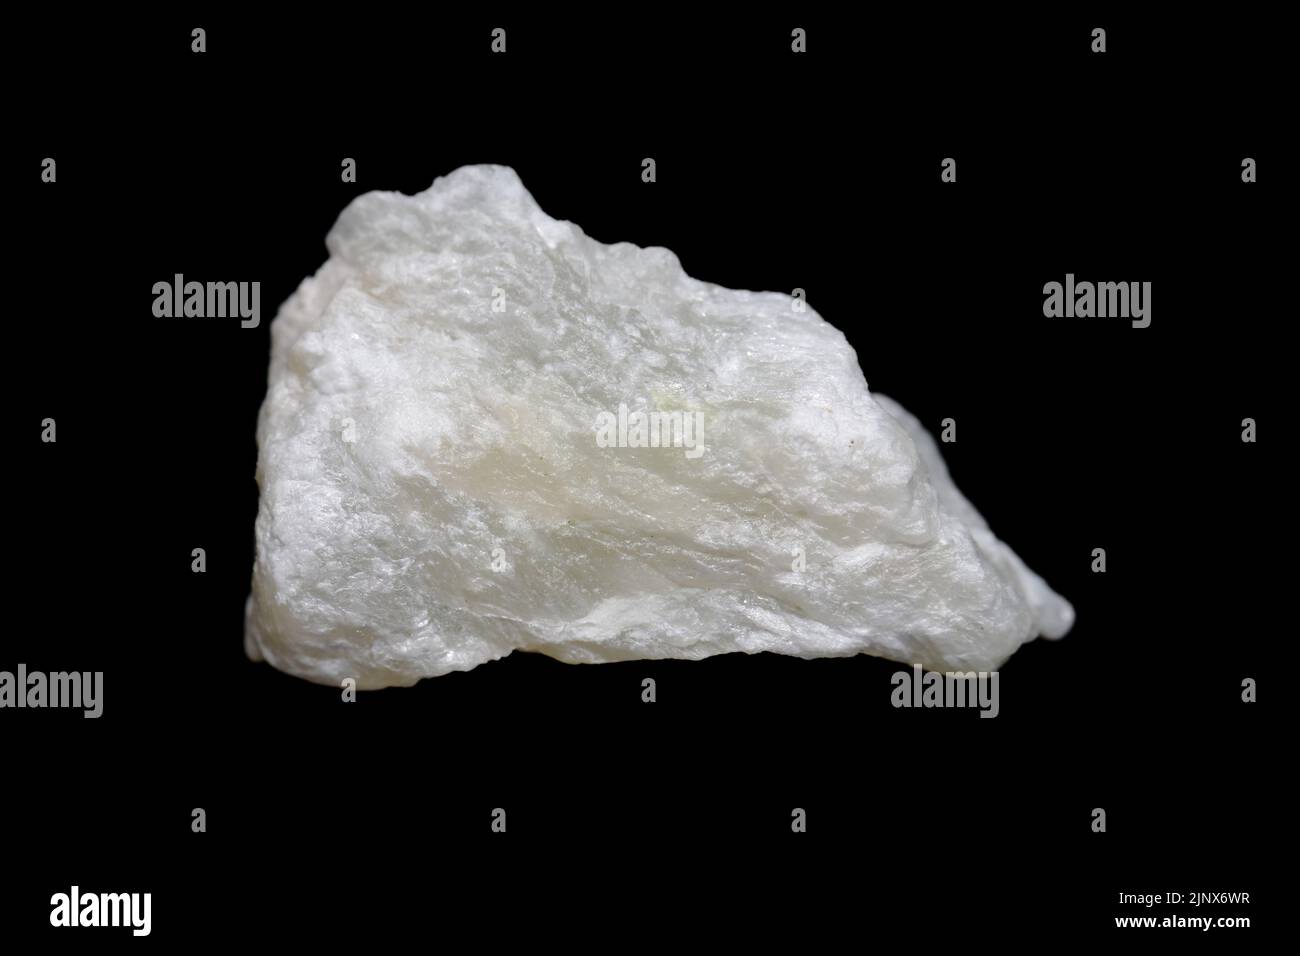 Raw Talc (talcum) stone on dark background, talc is a clay mineral used in many industries ex. powder, cosmetic, paint Stock Photo